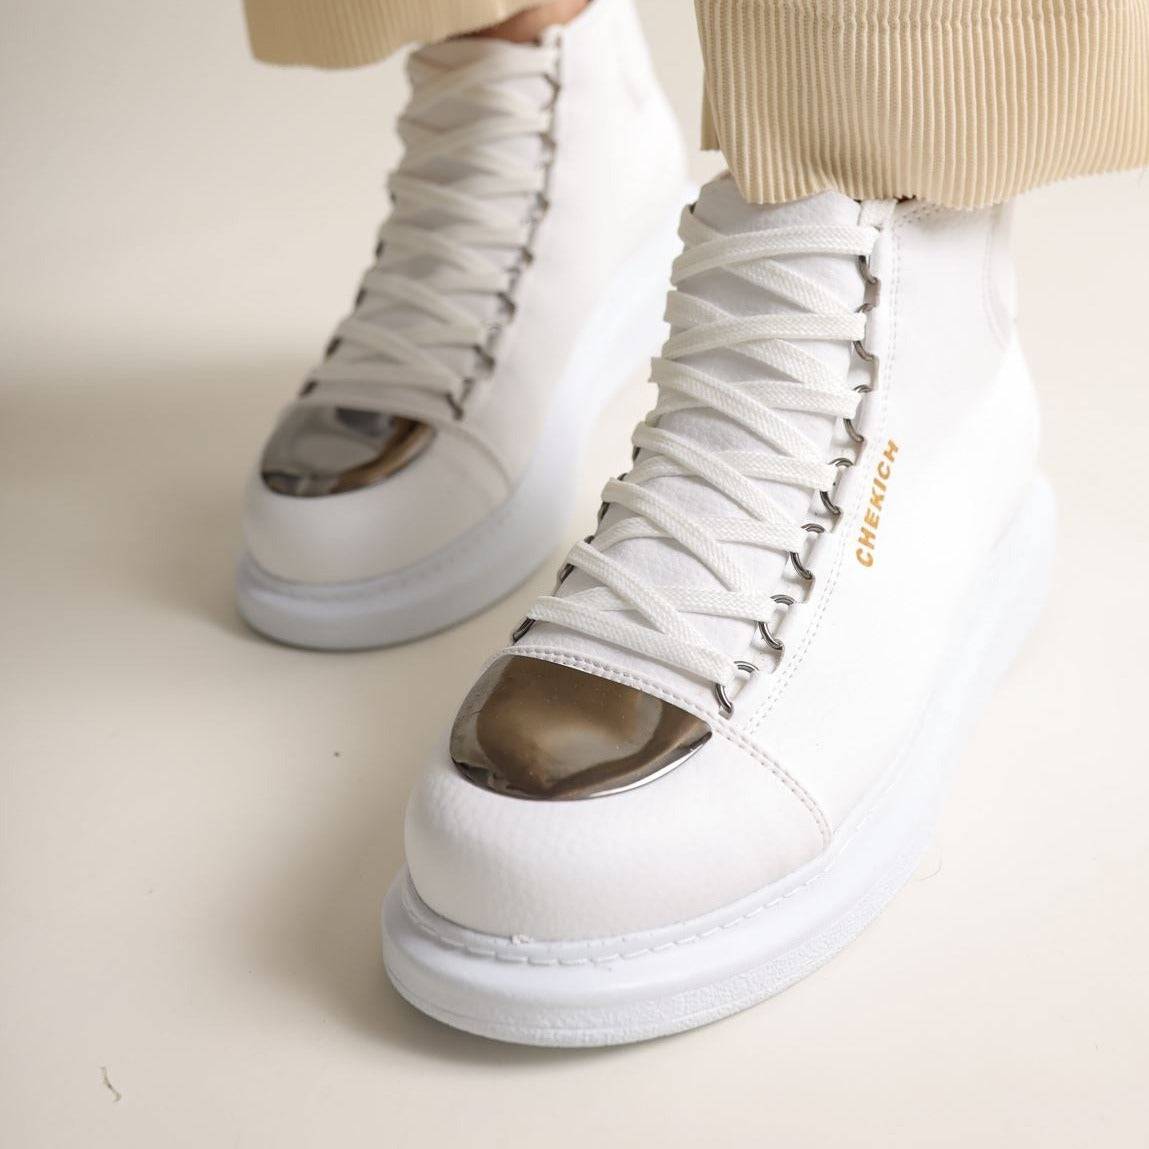 High Top Platform Sneakers for Men by Apollo | Kelly X in Pristine Purity